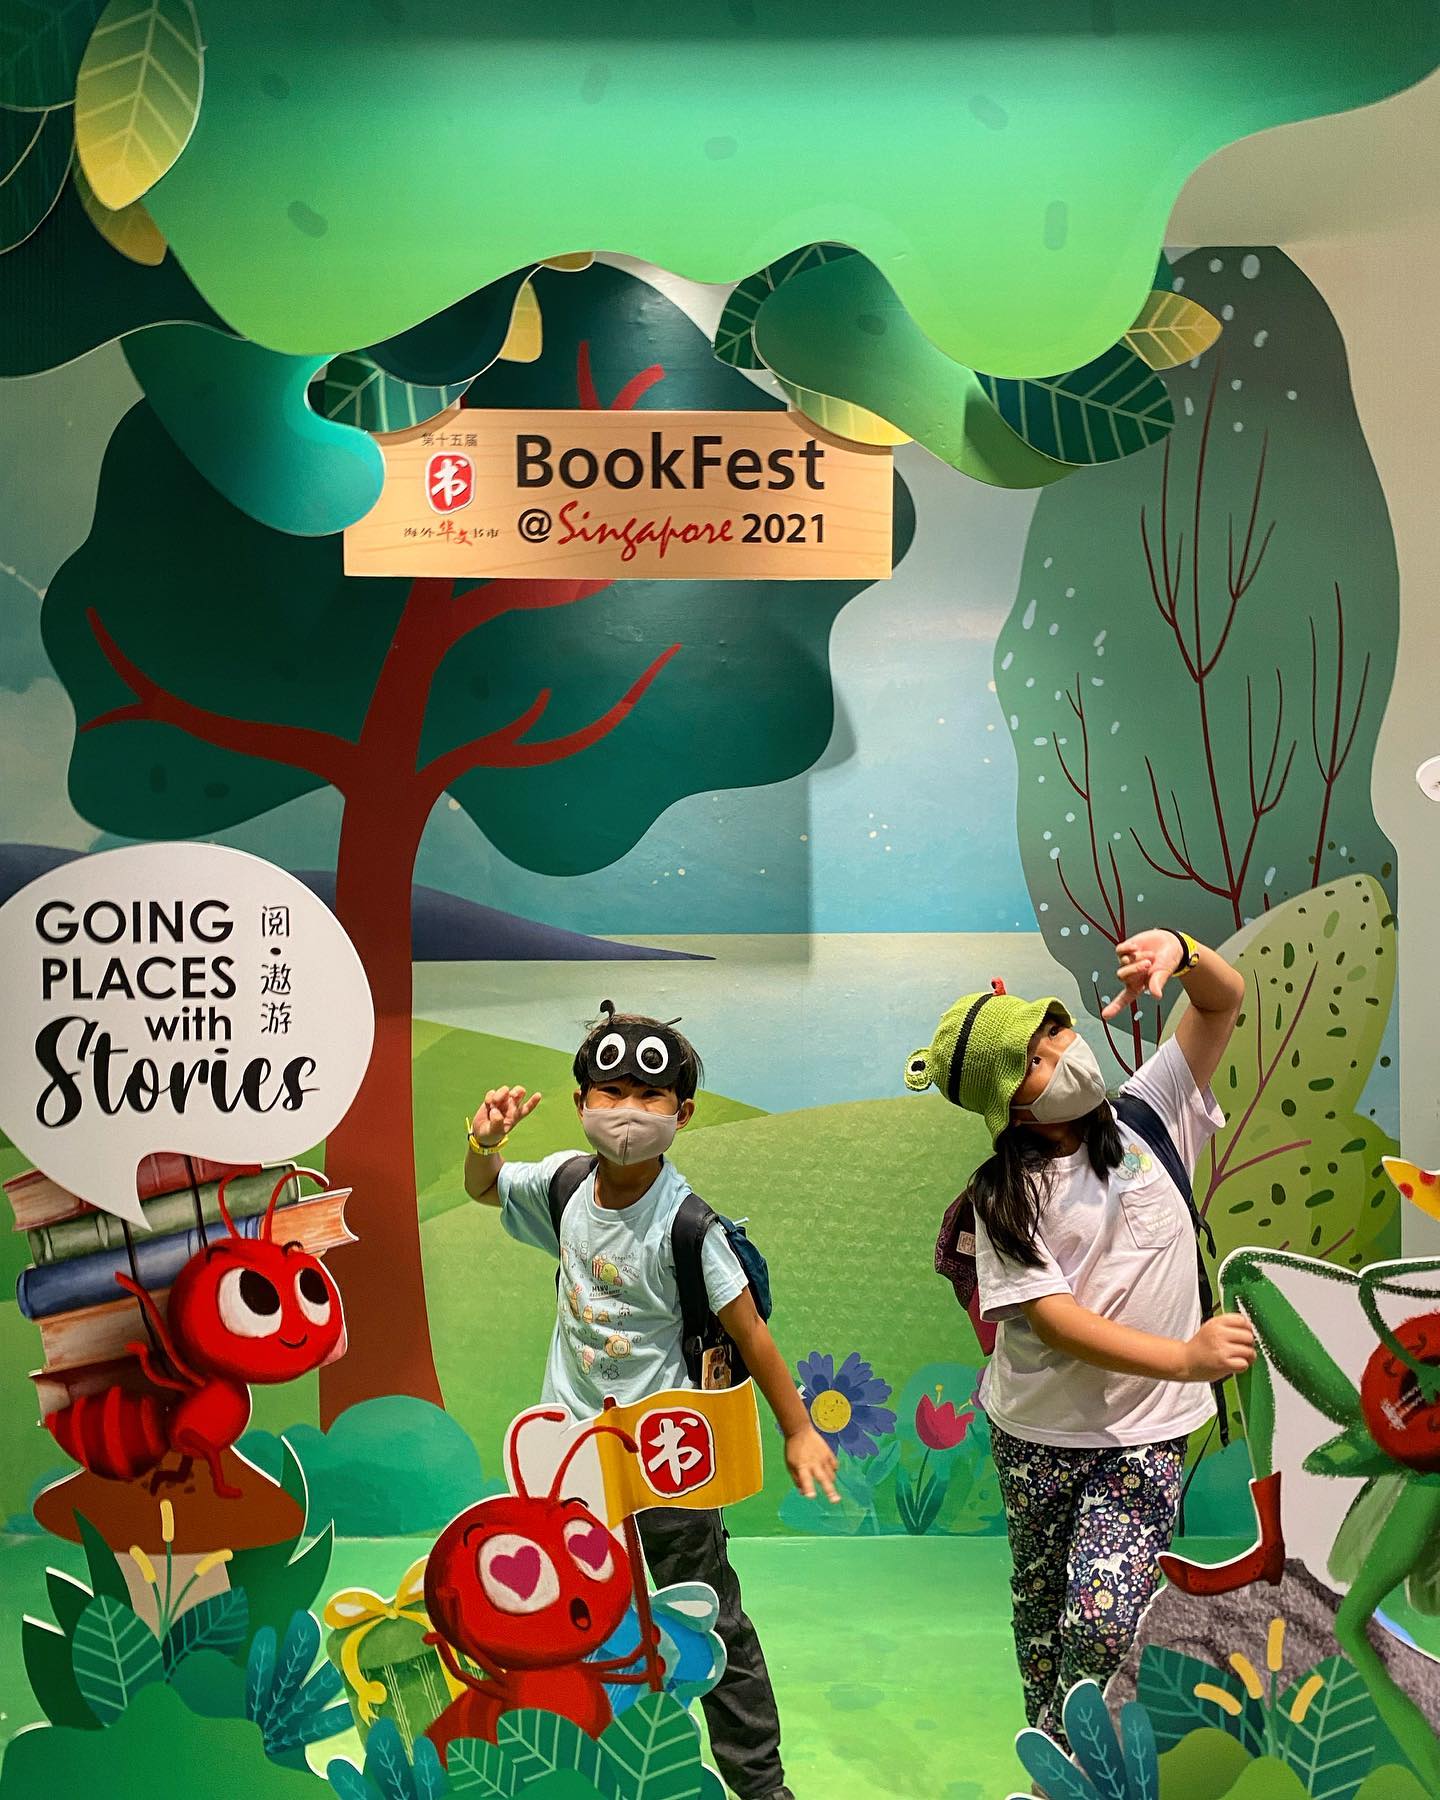 Bookfest 2022 has Etsy’s Christmas crafters’ market, a large book fair, a Pikachu meet & greet & more